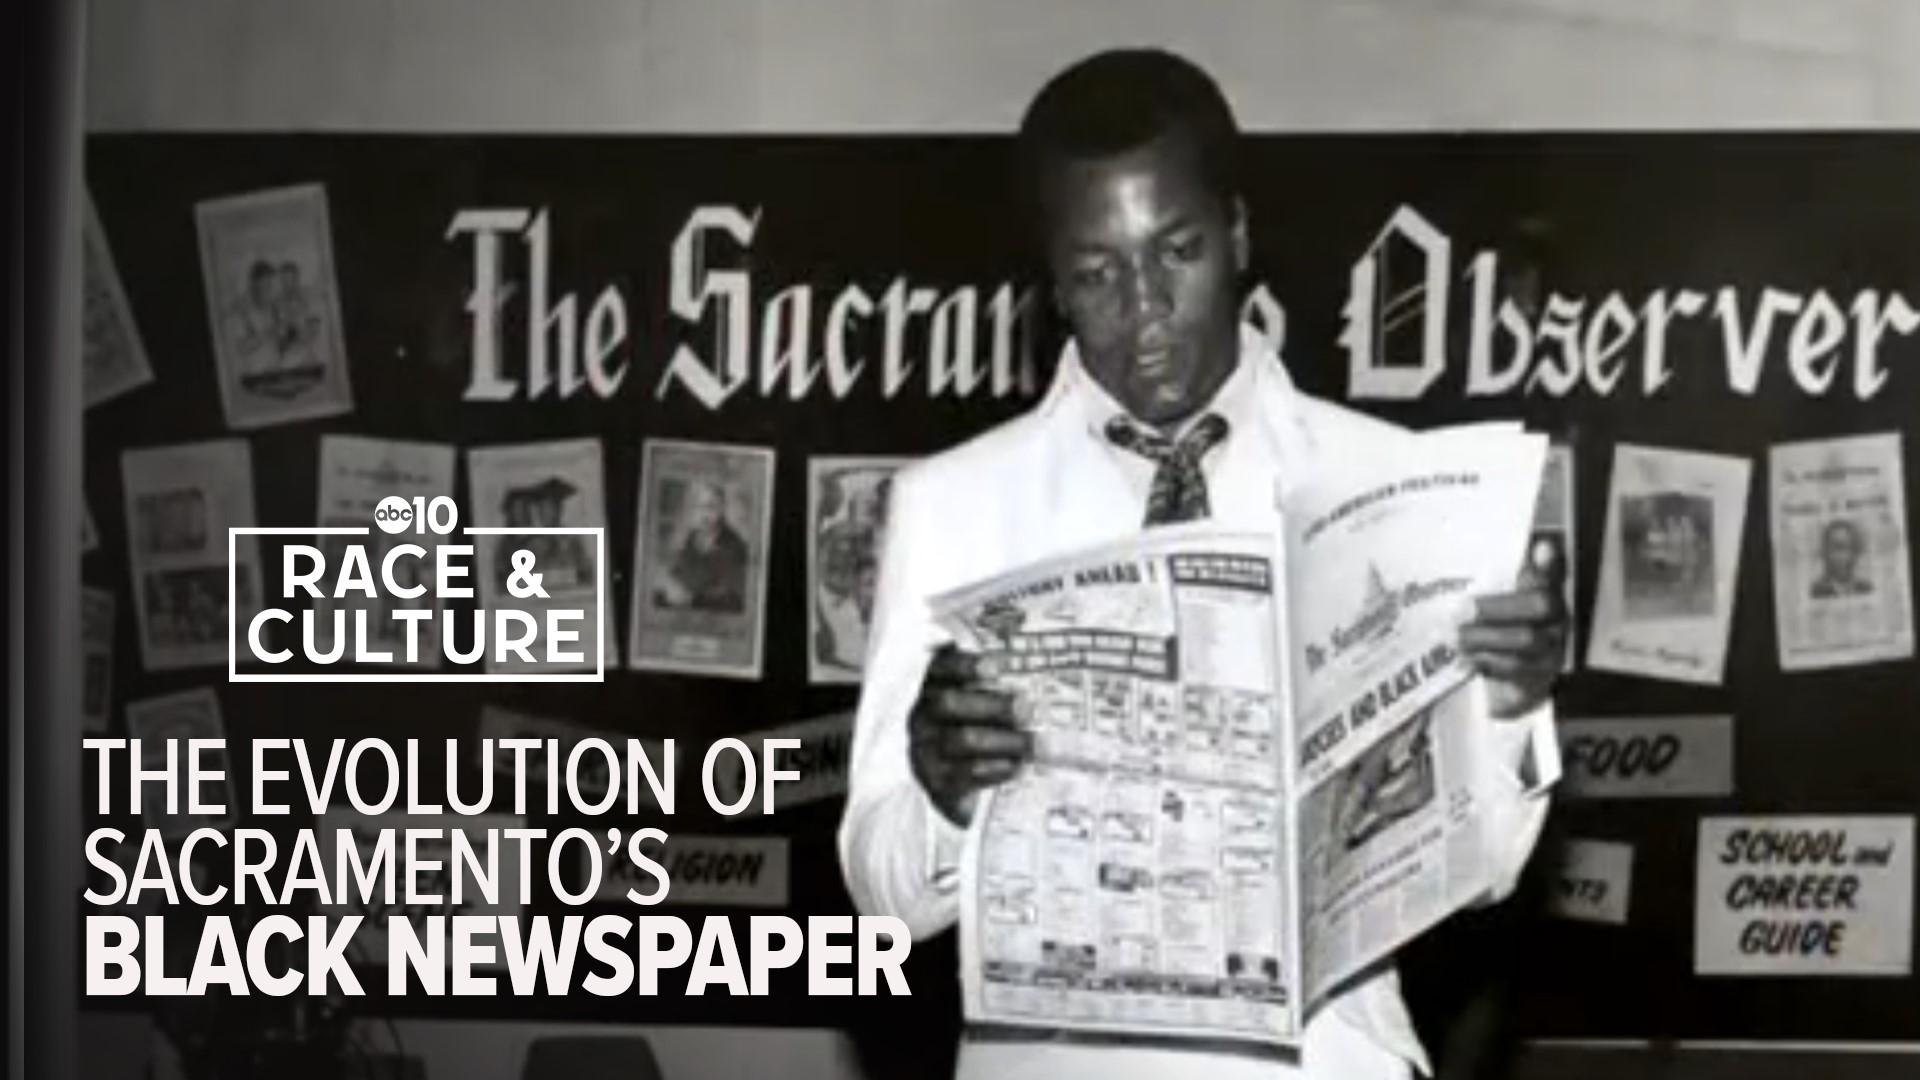 The Black-owned newspaper has served communities of color since Thanksgiving Day in 1962.